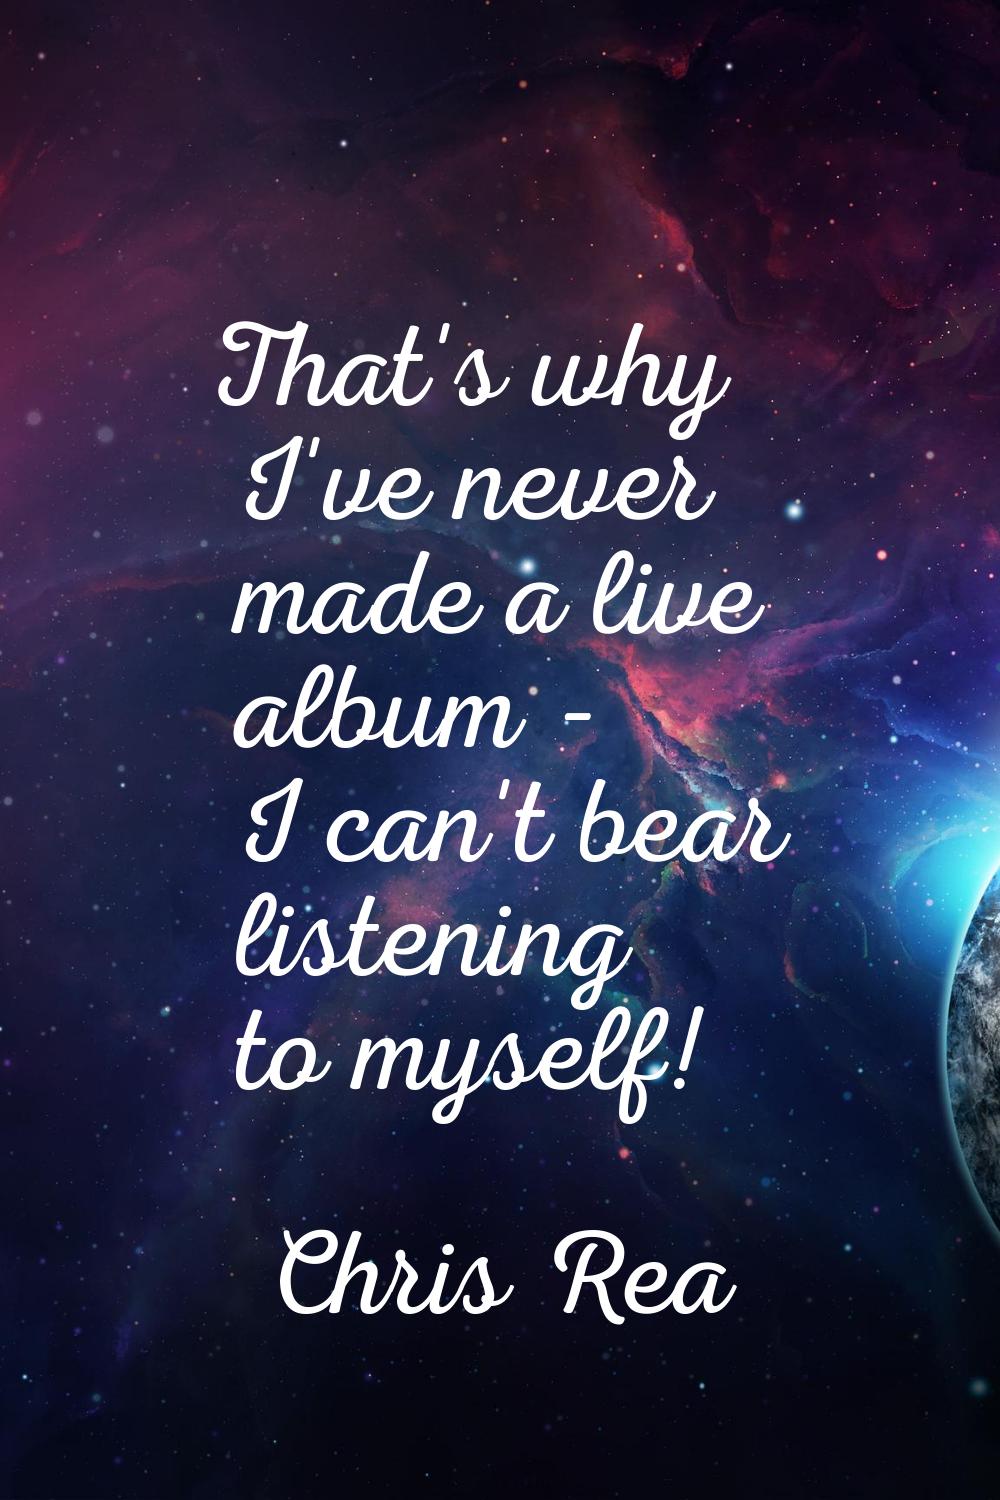 That's why I've never made a live album - I can't bear listening to myself!